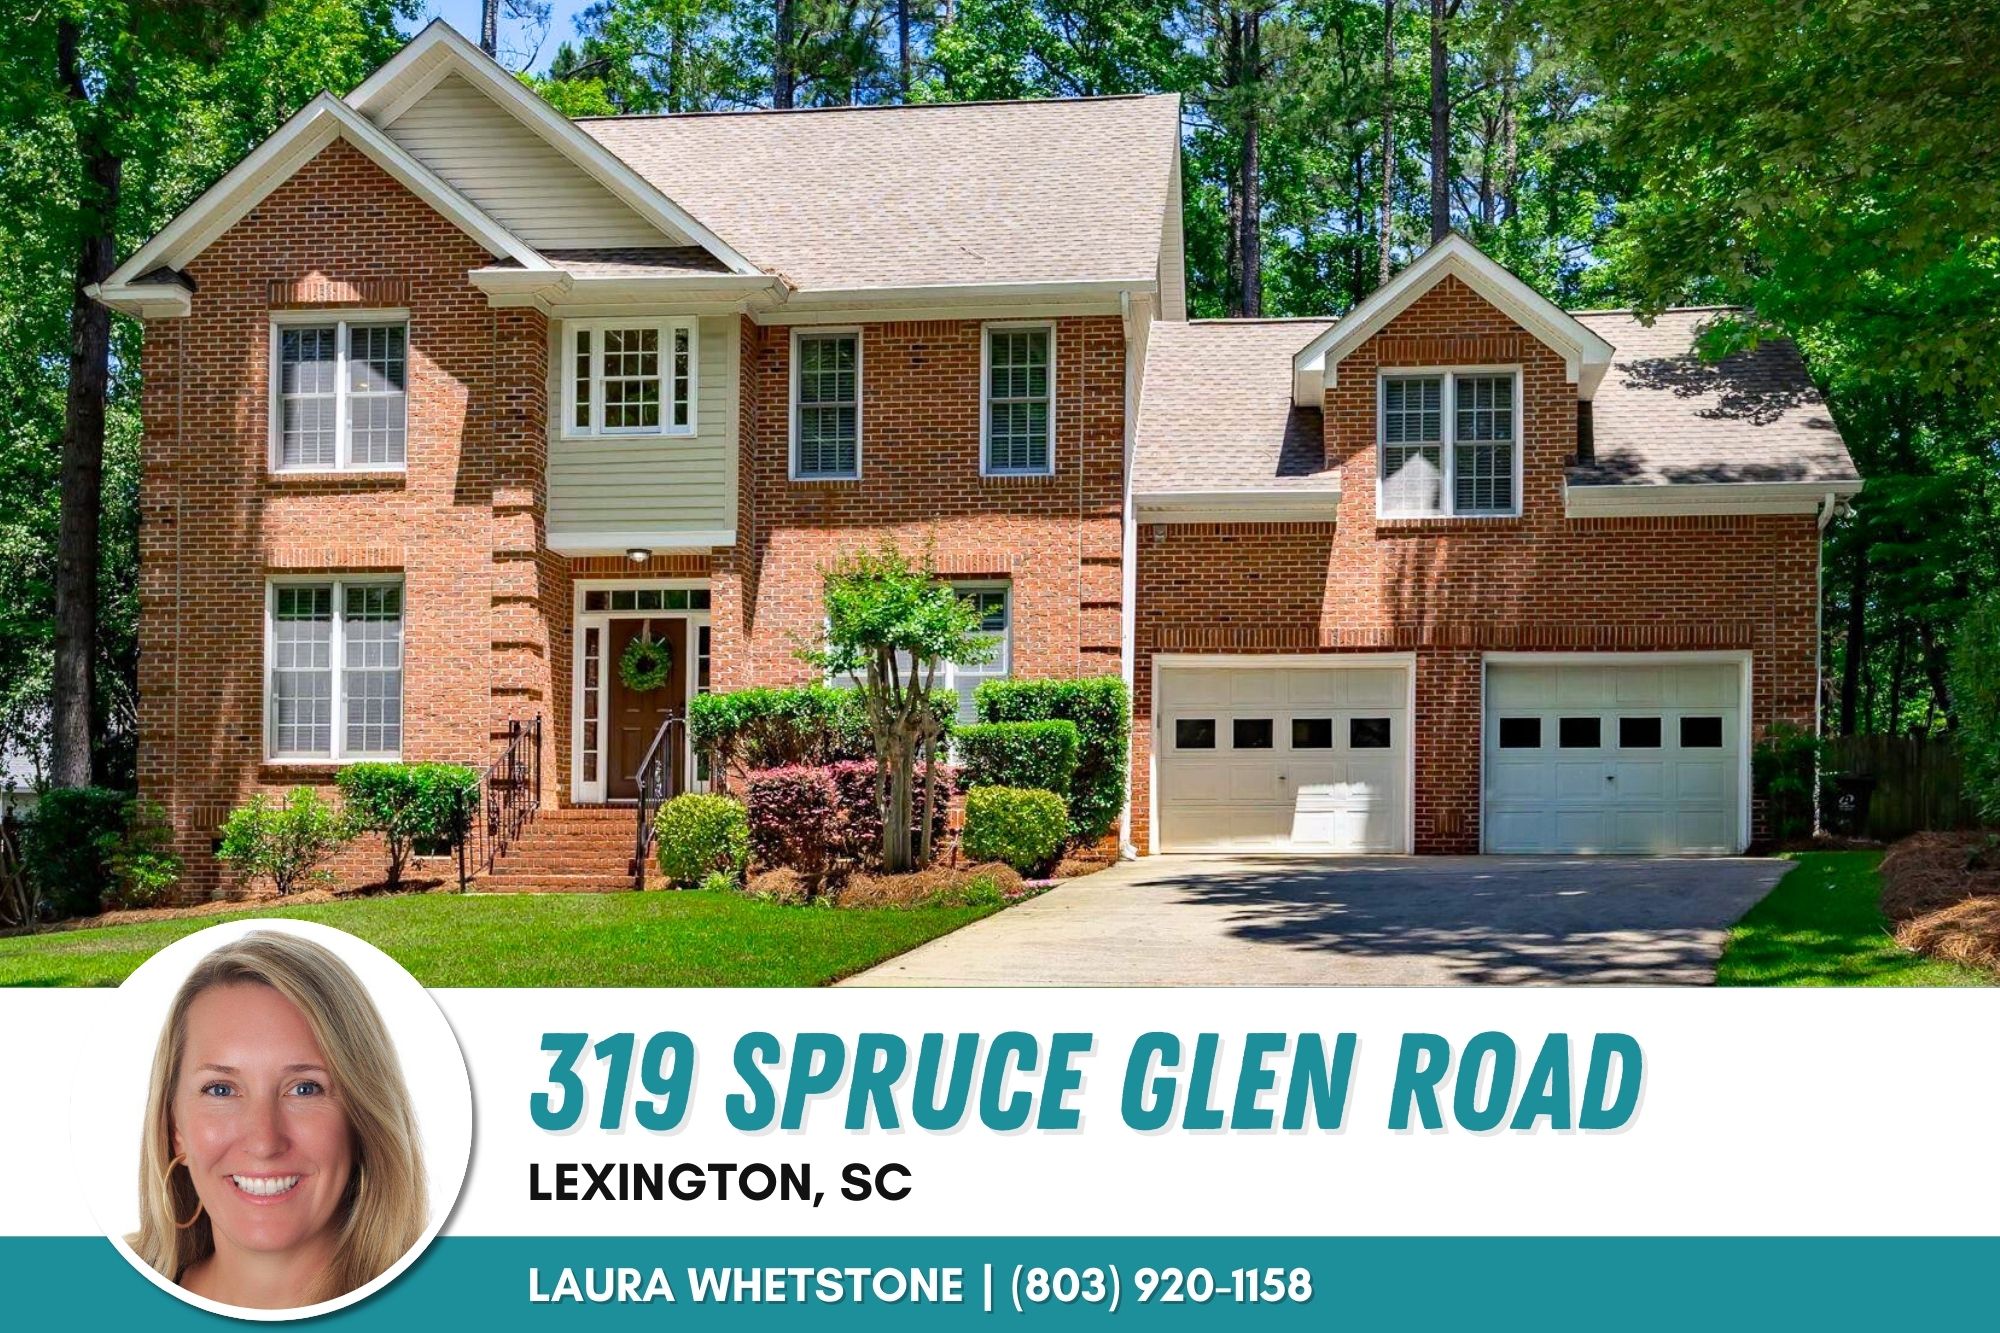 Just listed in Hope Ferry Plantation - Lexington